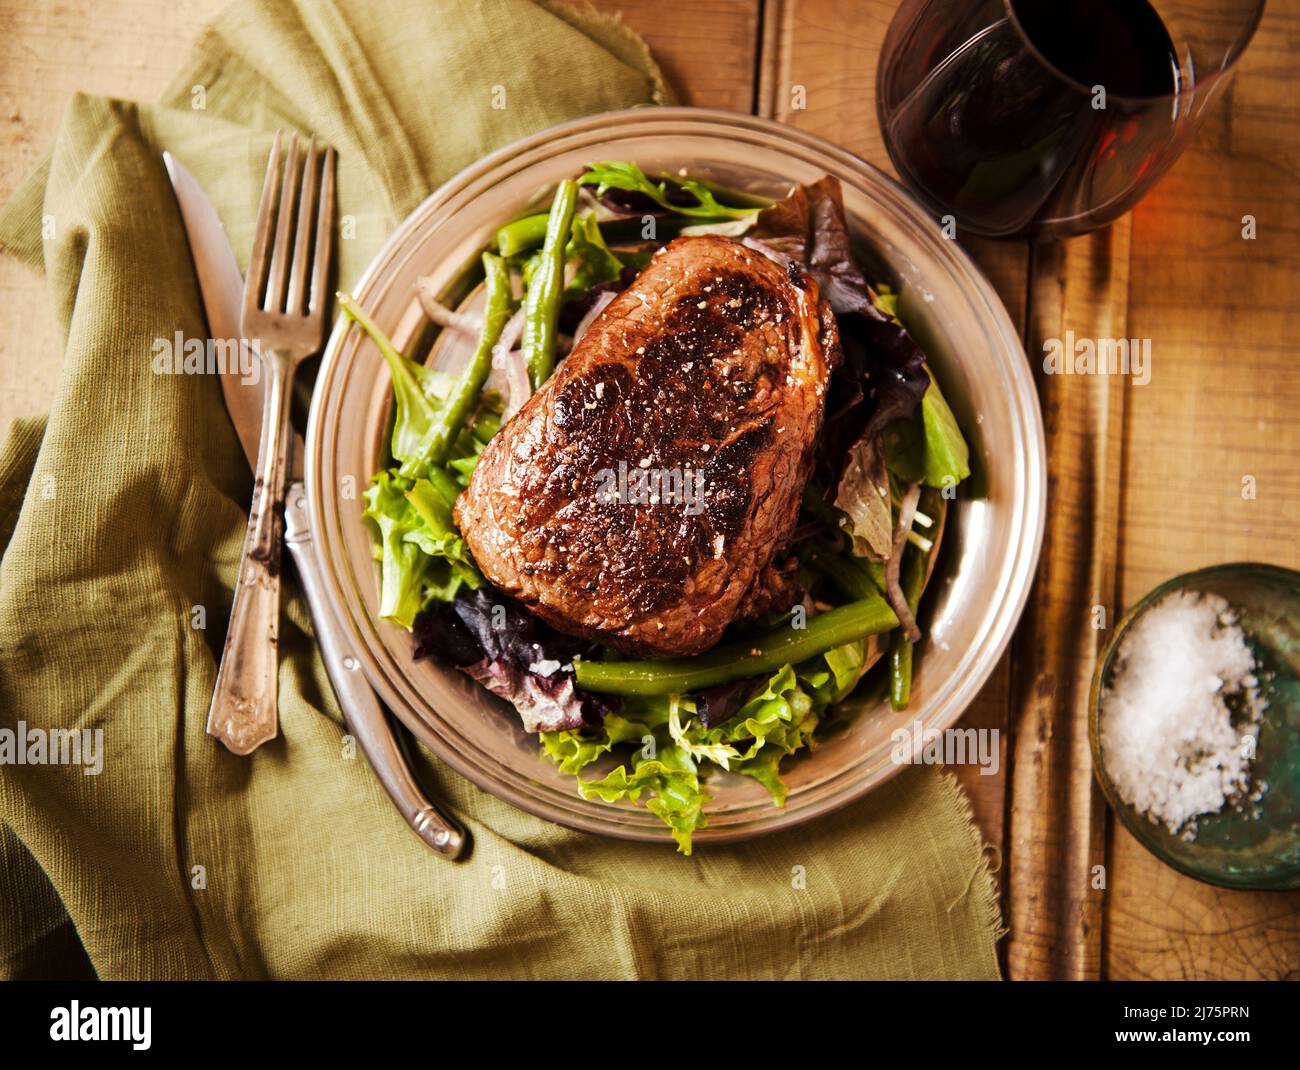 Sliced Grass Fed Sirloin Steak on a Bed of Wine Stock Photo